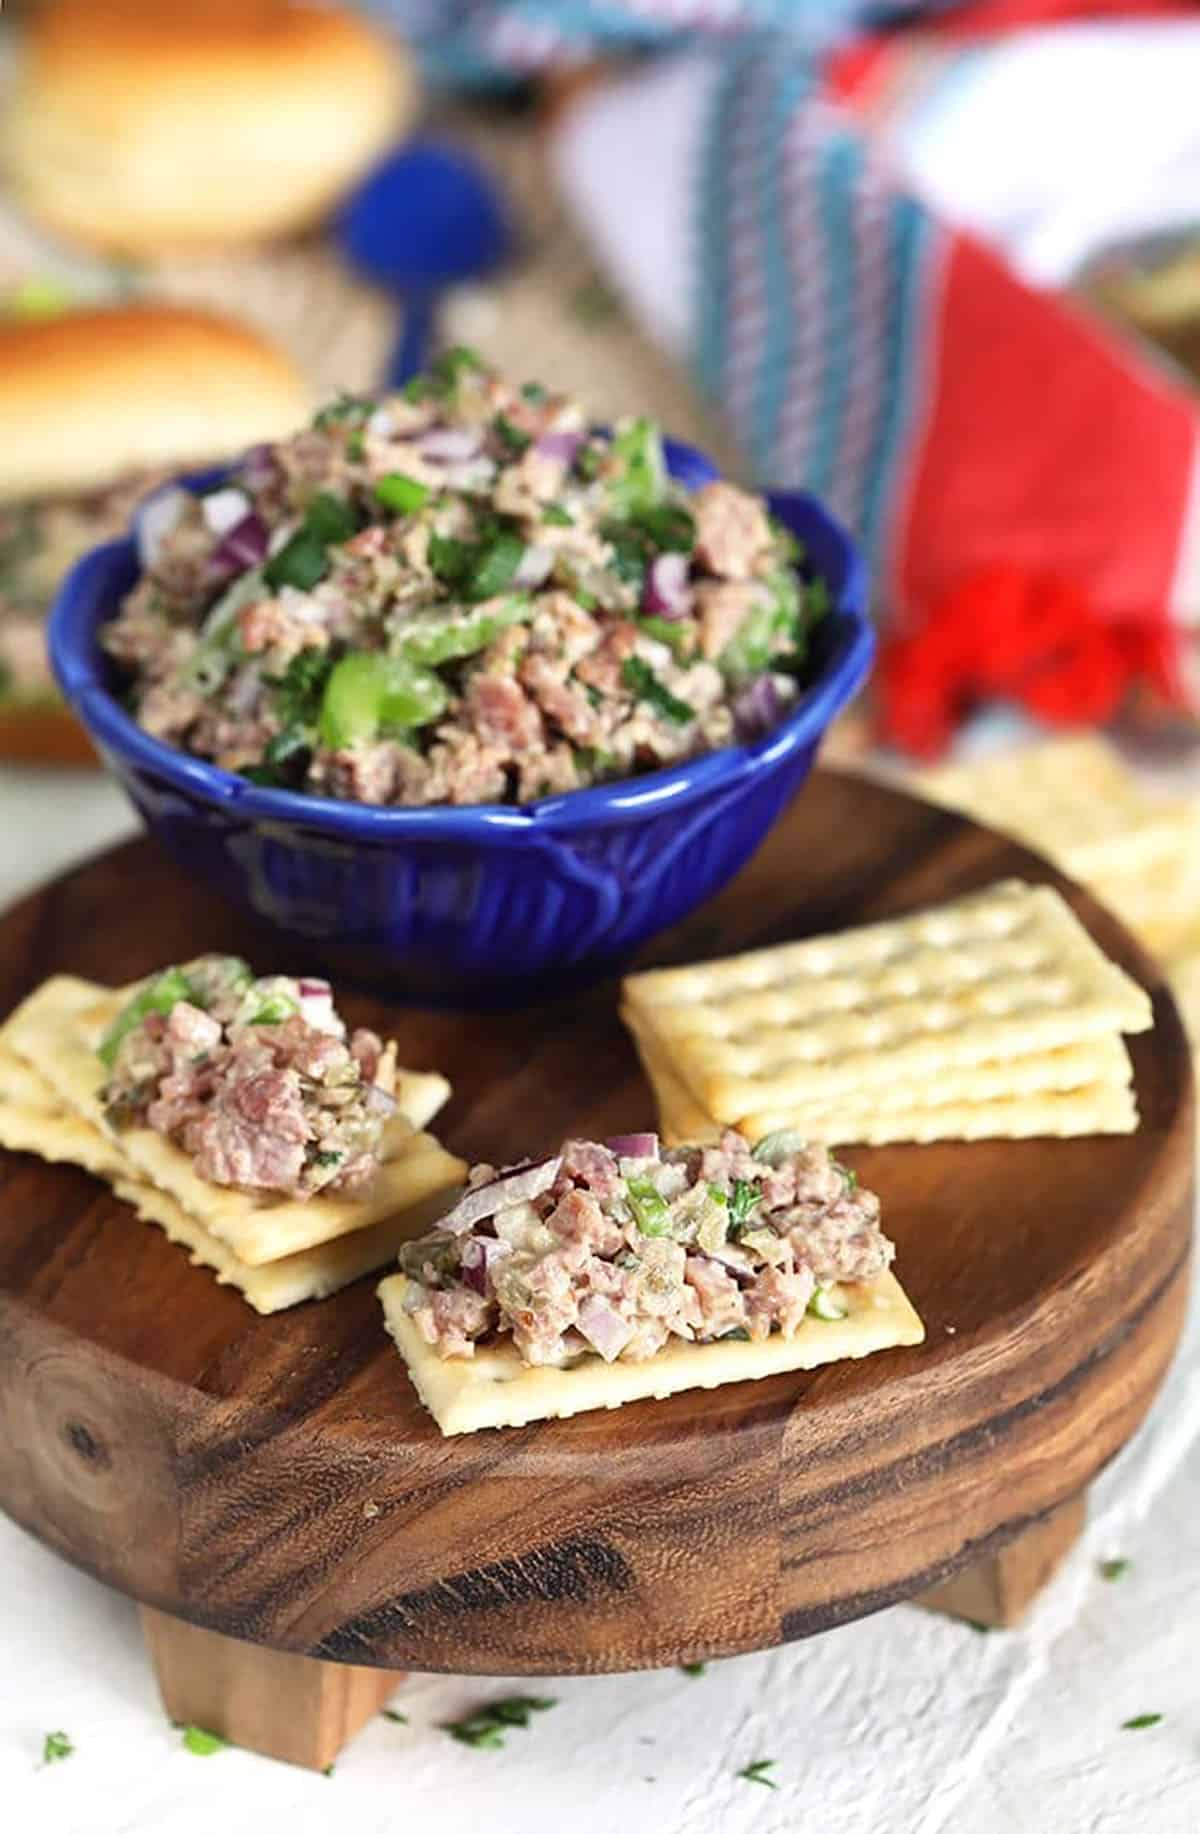 Ham salad on a Town cracker with a bowl of ham salad in a blue bowl.